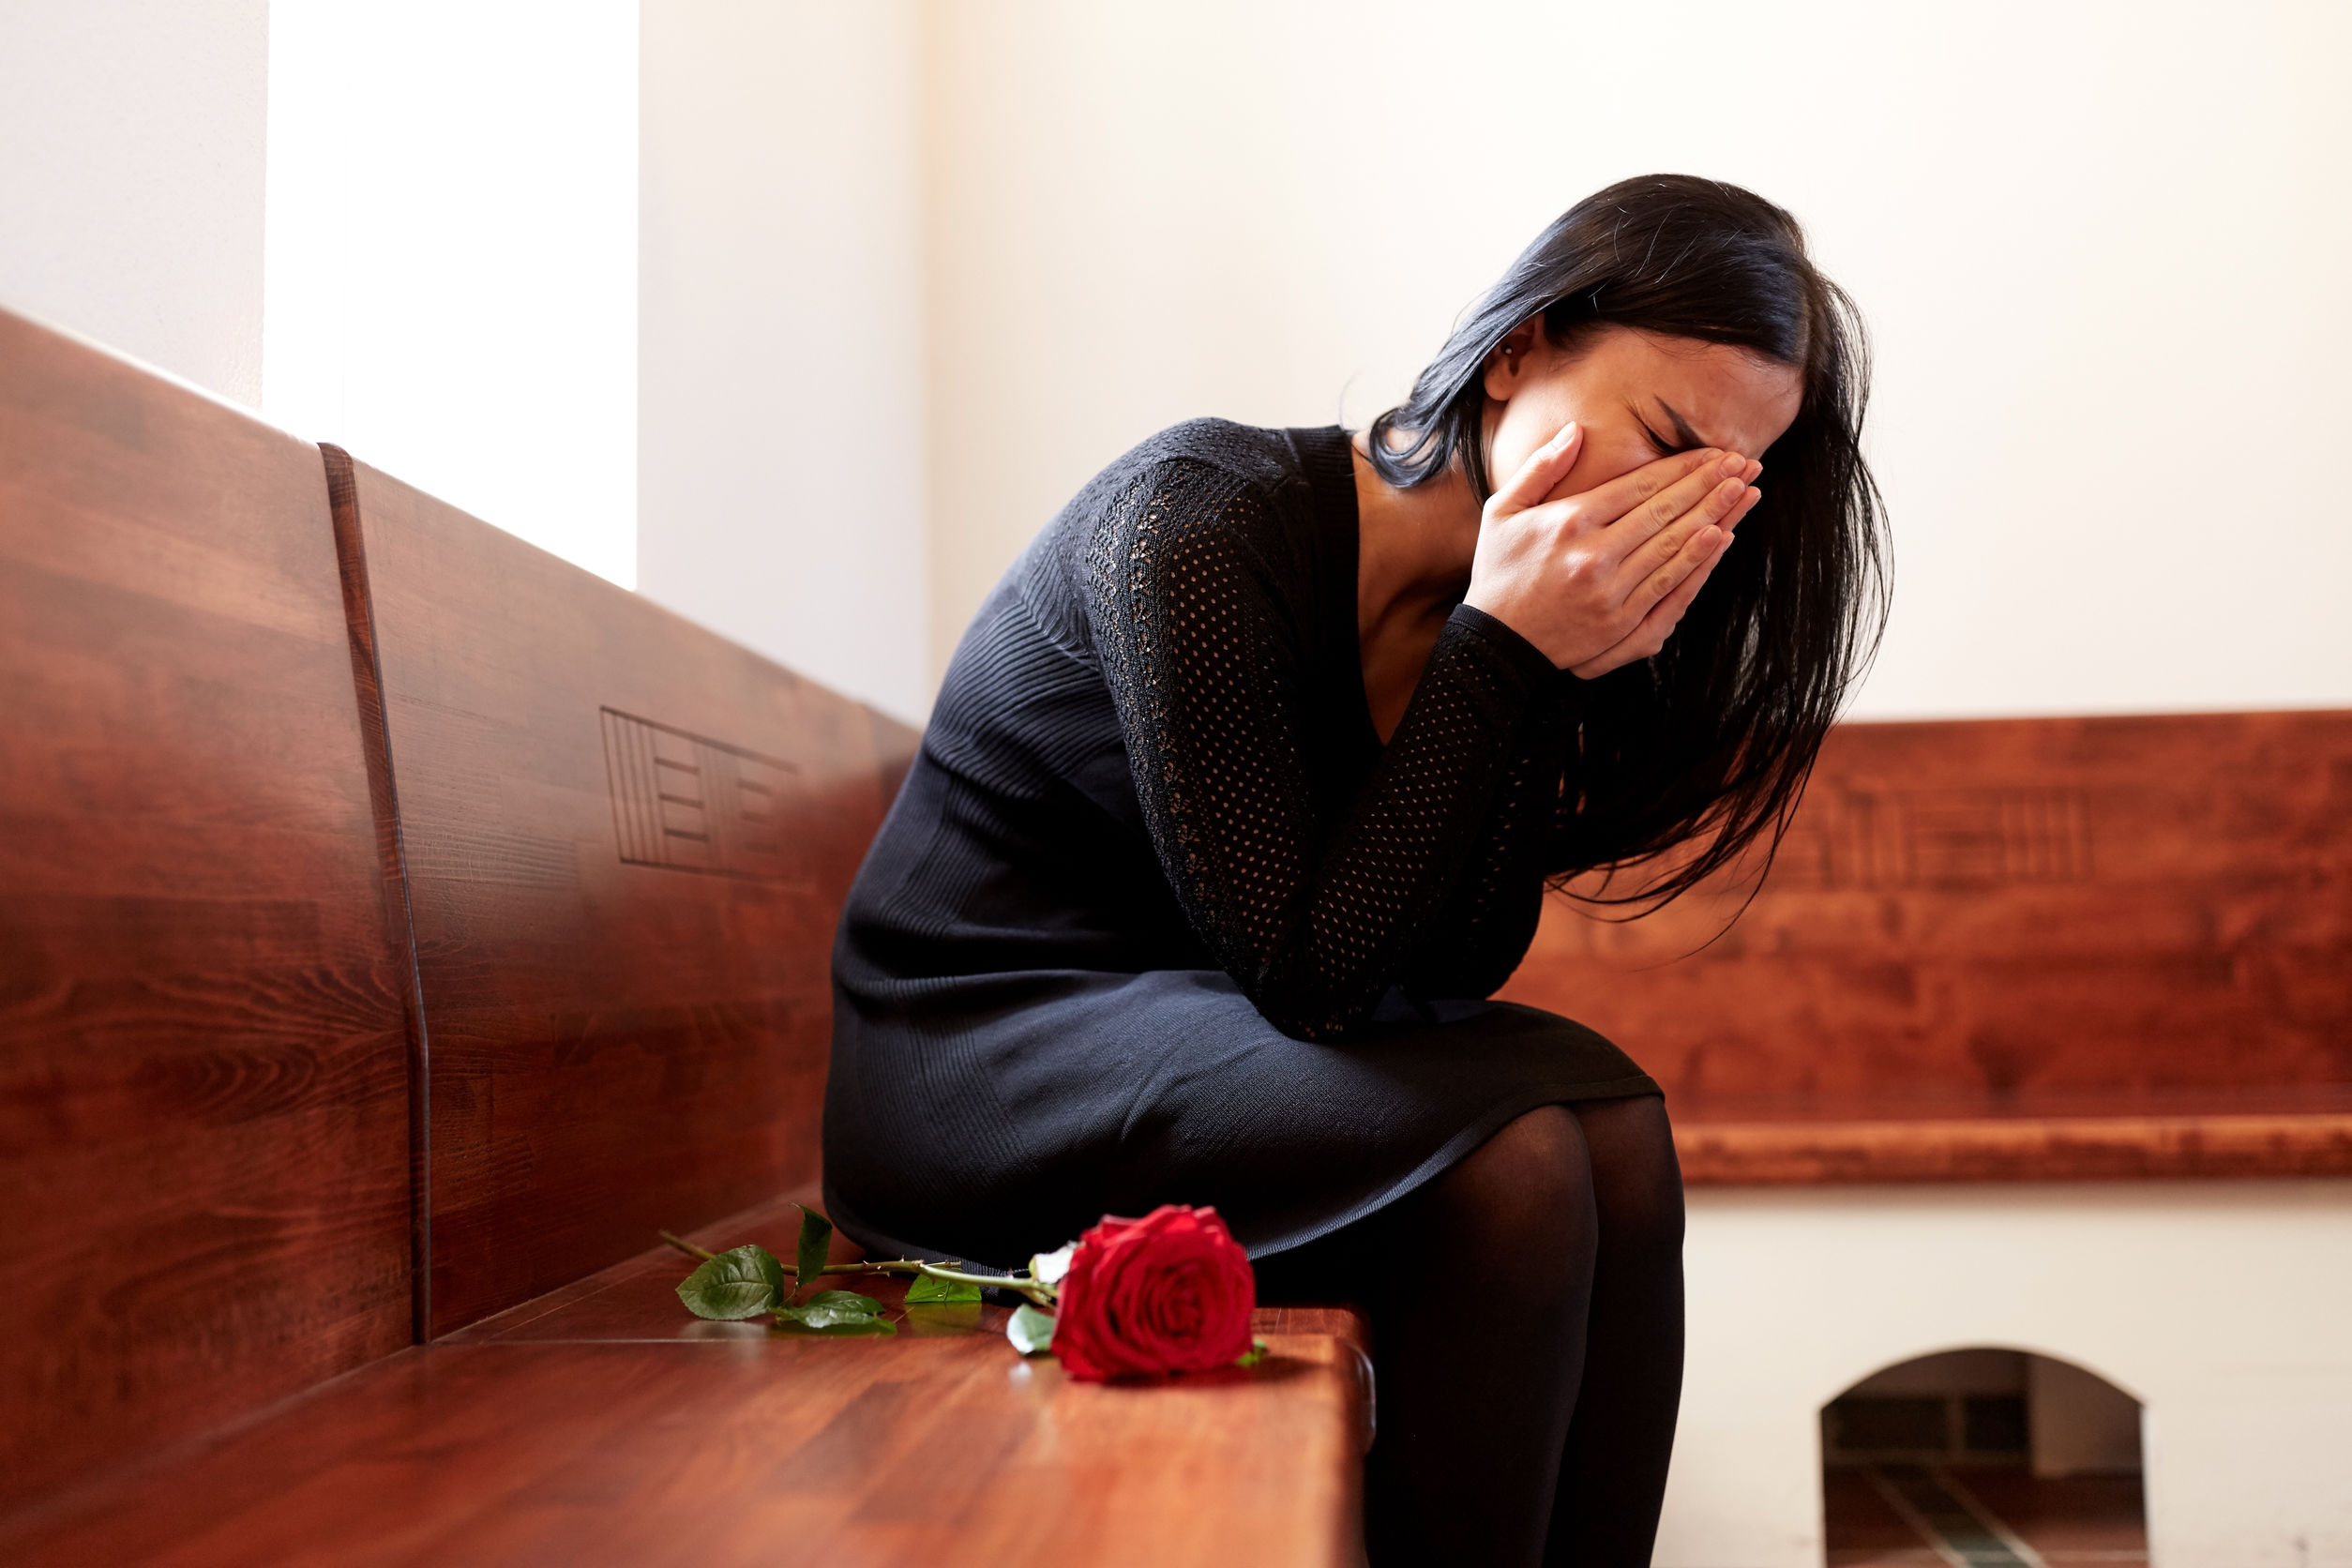 When Florida Funeral Homes Act with Negligence, Families Lose Faith